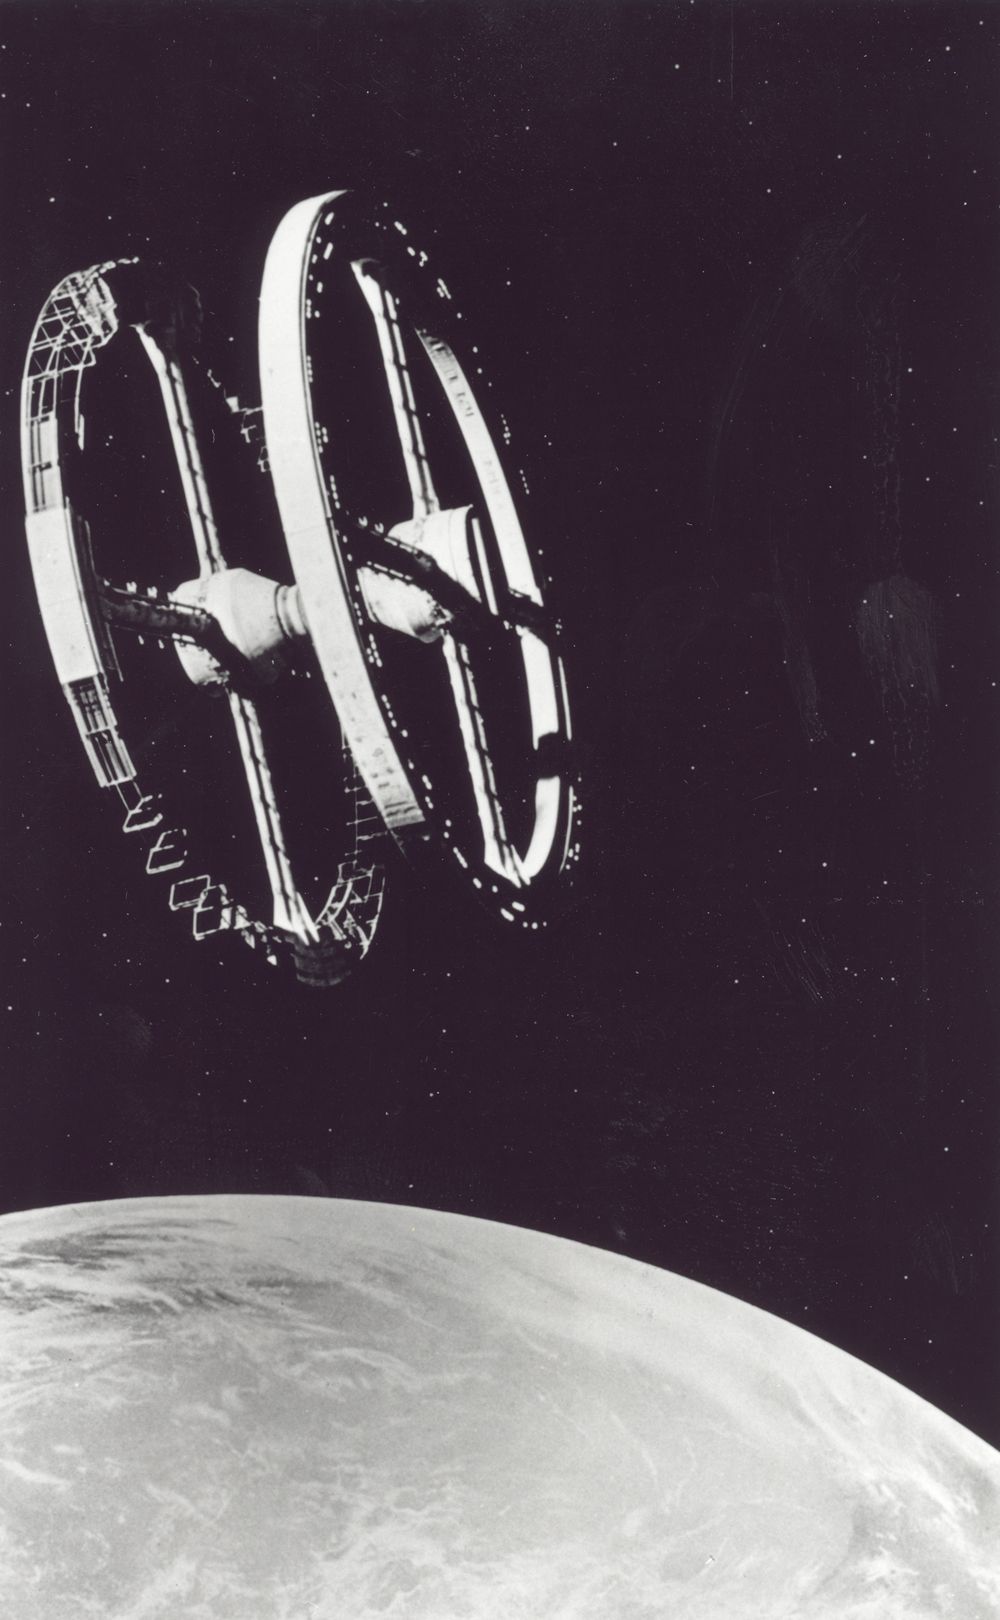 Space History Photo: 2001:A Space Odyssey Space Station